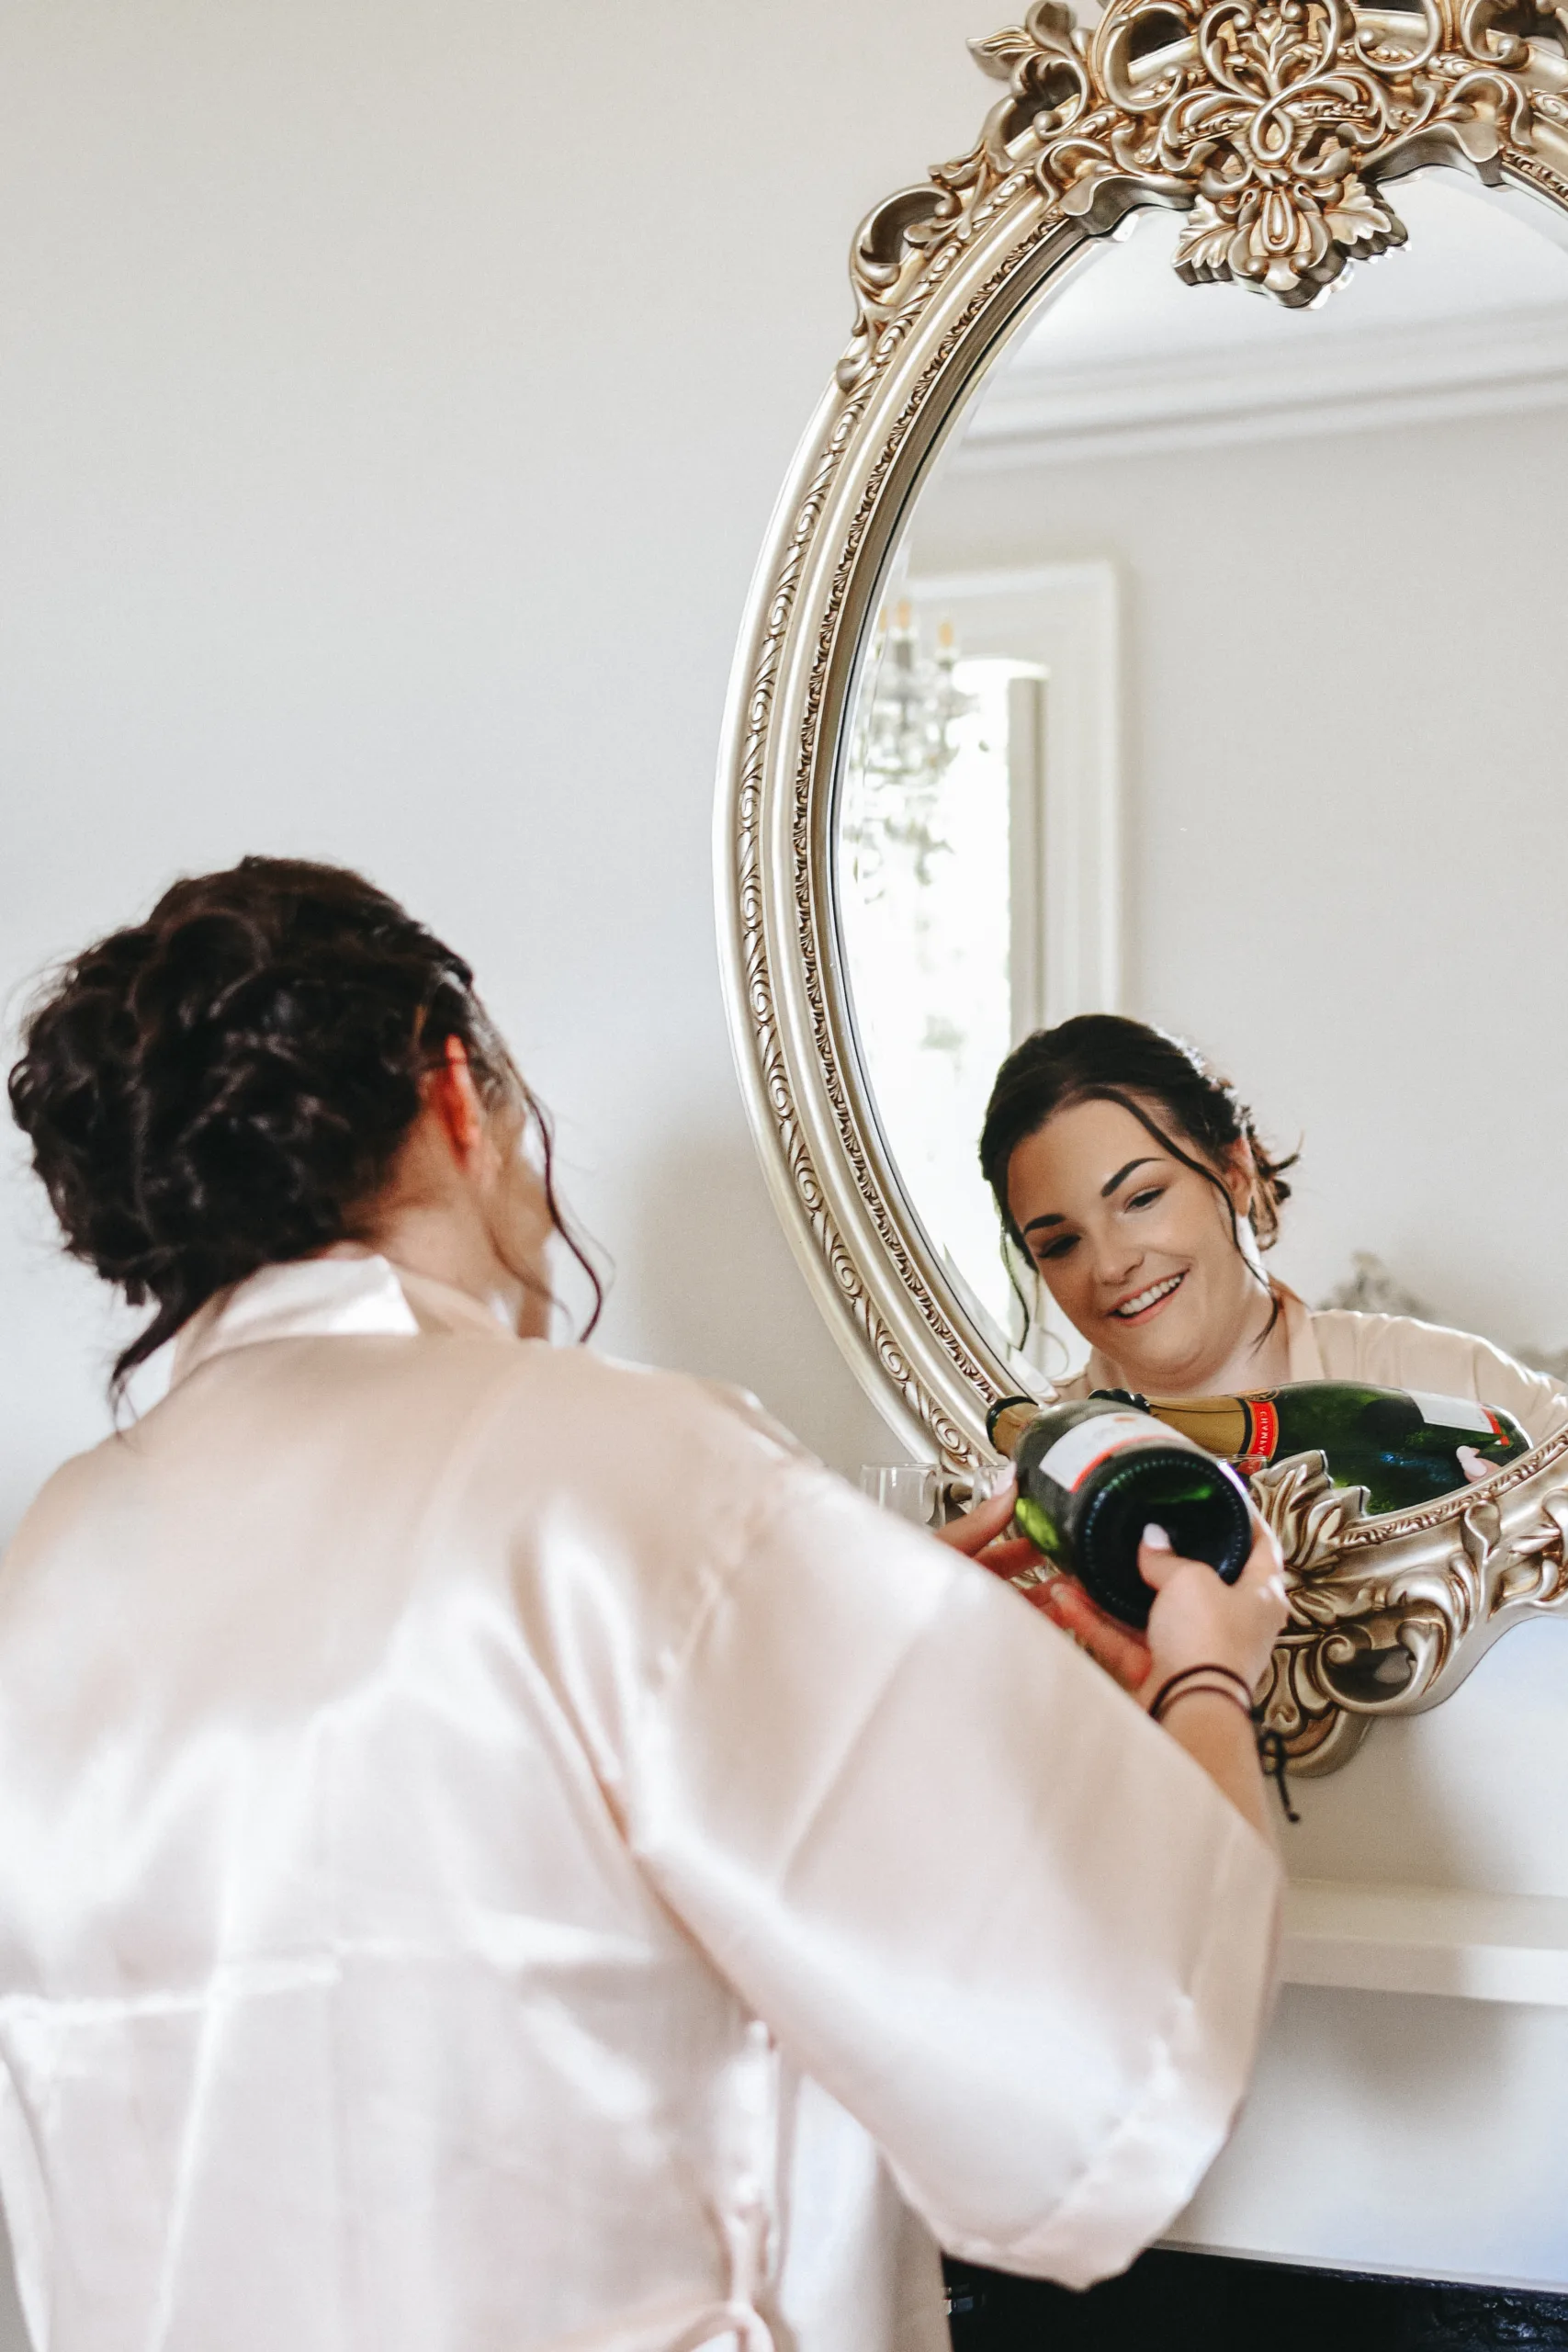 A bride getting ready for her wedding in front of a mirror while a photographer captures the moment.